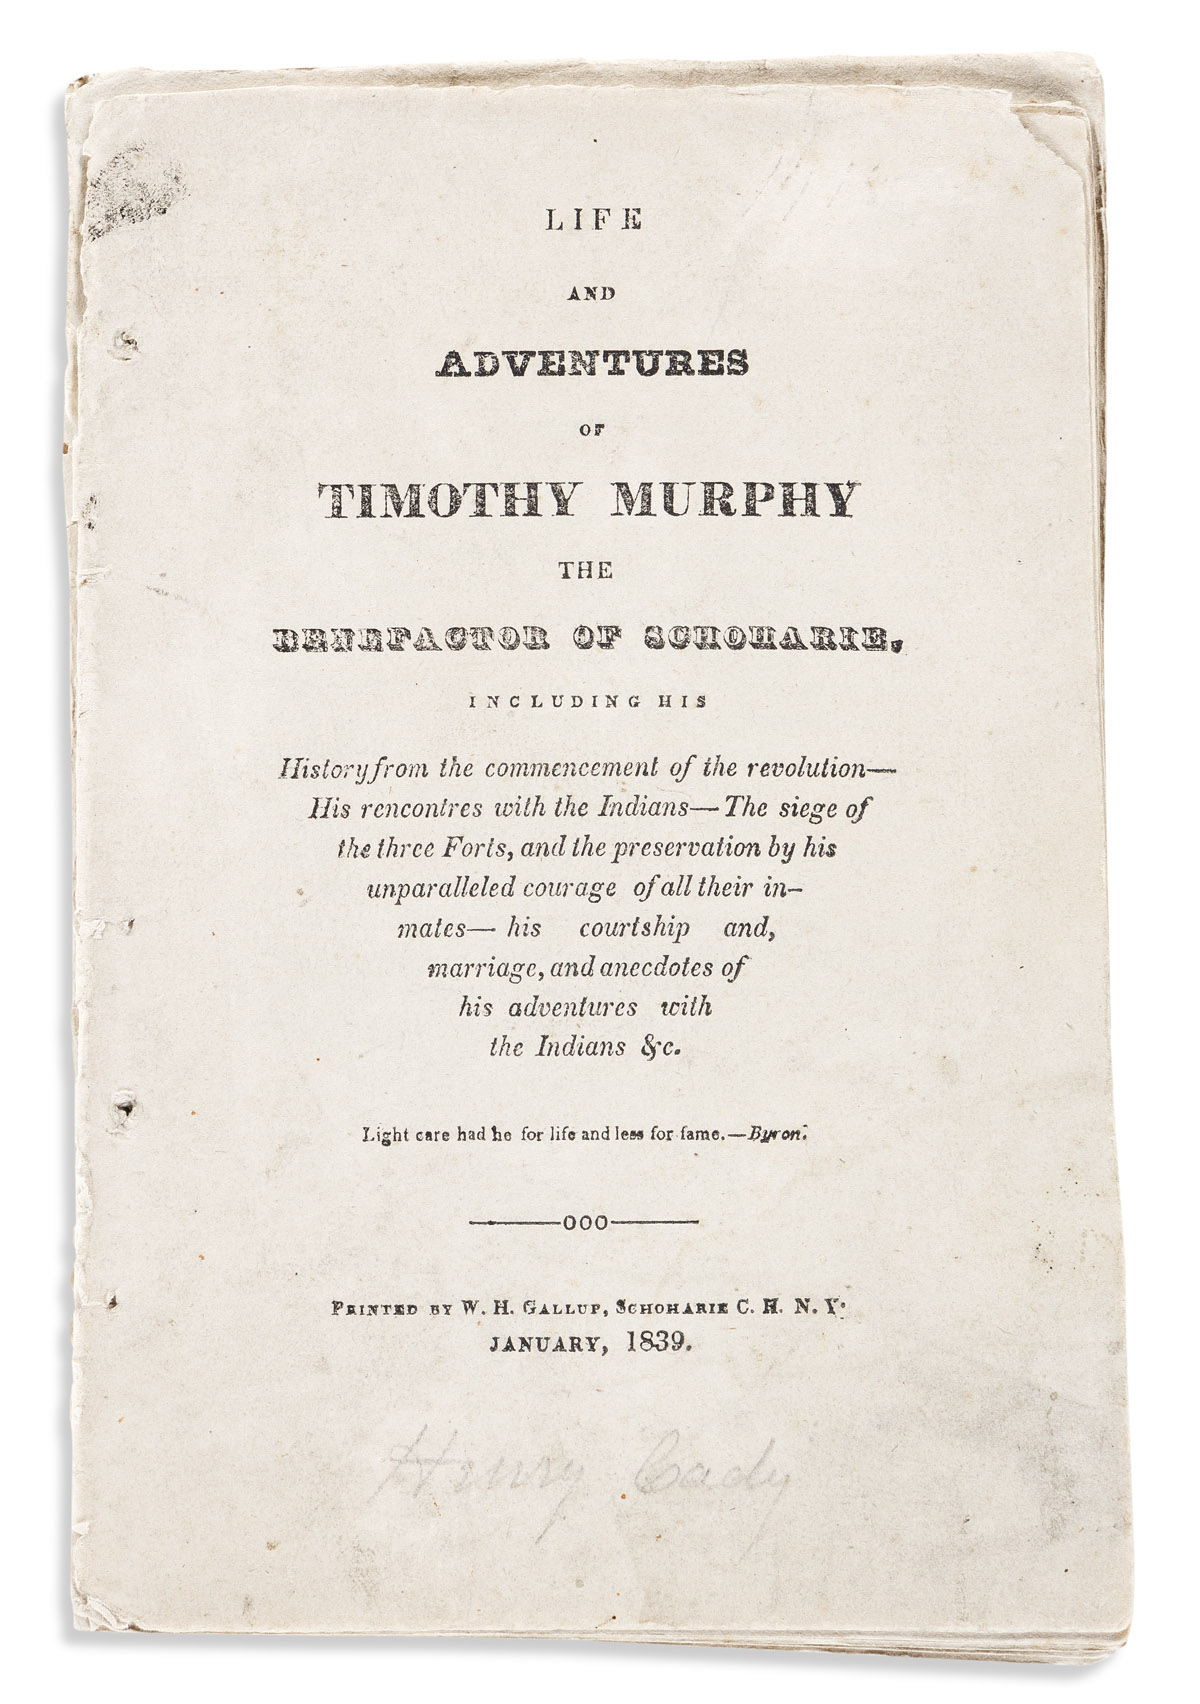 (AMERICAN REVOLUTION--HISTORY.) [William Sigsby.] Life and Adventures of Timothy Murphy . . . from the Commencement of the Revolution.